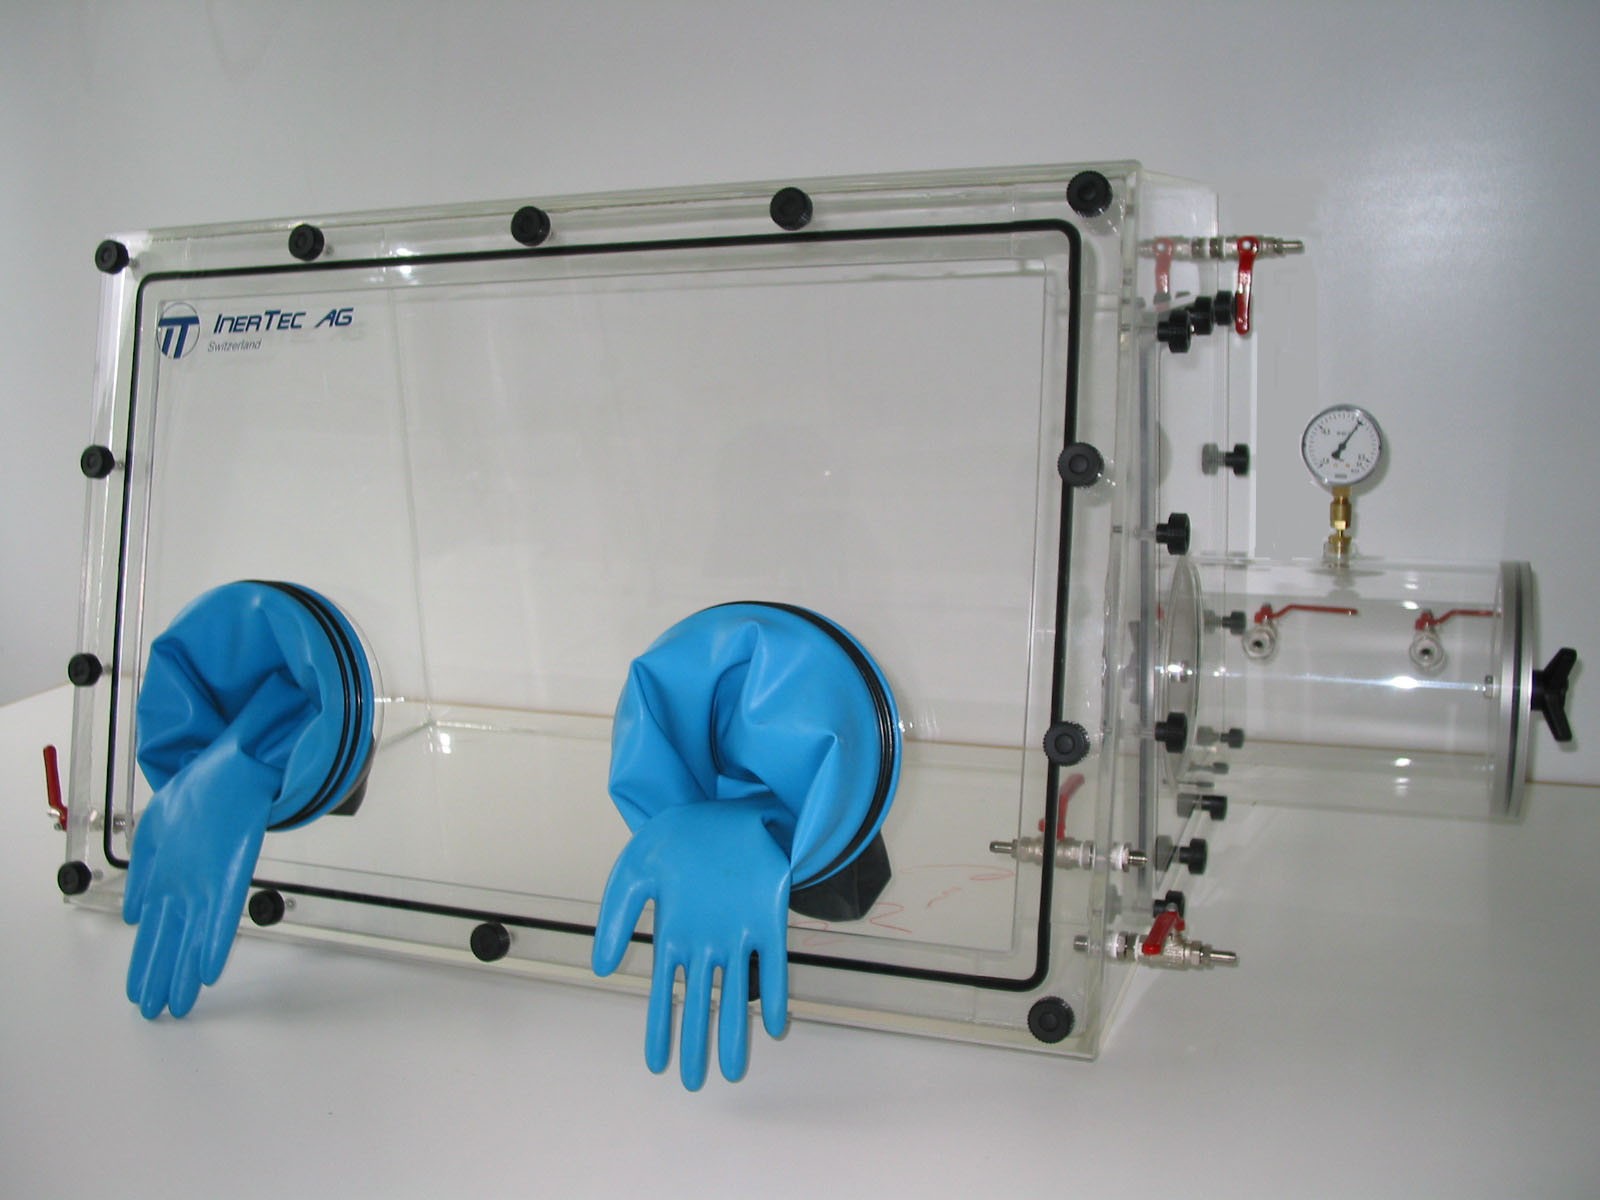 Glovebox made of acrylic&gt; Gas filling: by hand, front design: swivels upwards, side design: rectangular lock control: oxygen and humidity display